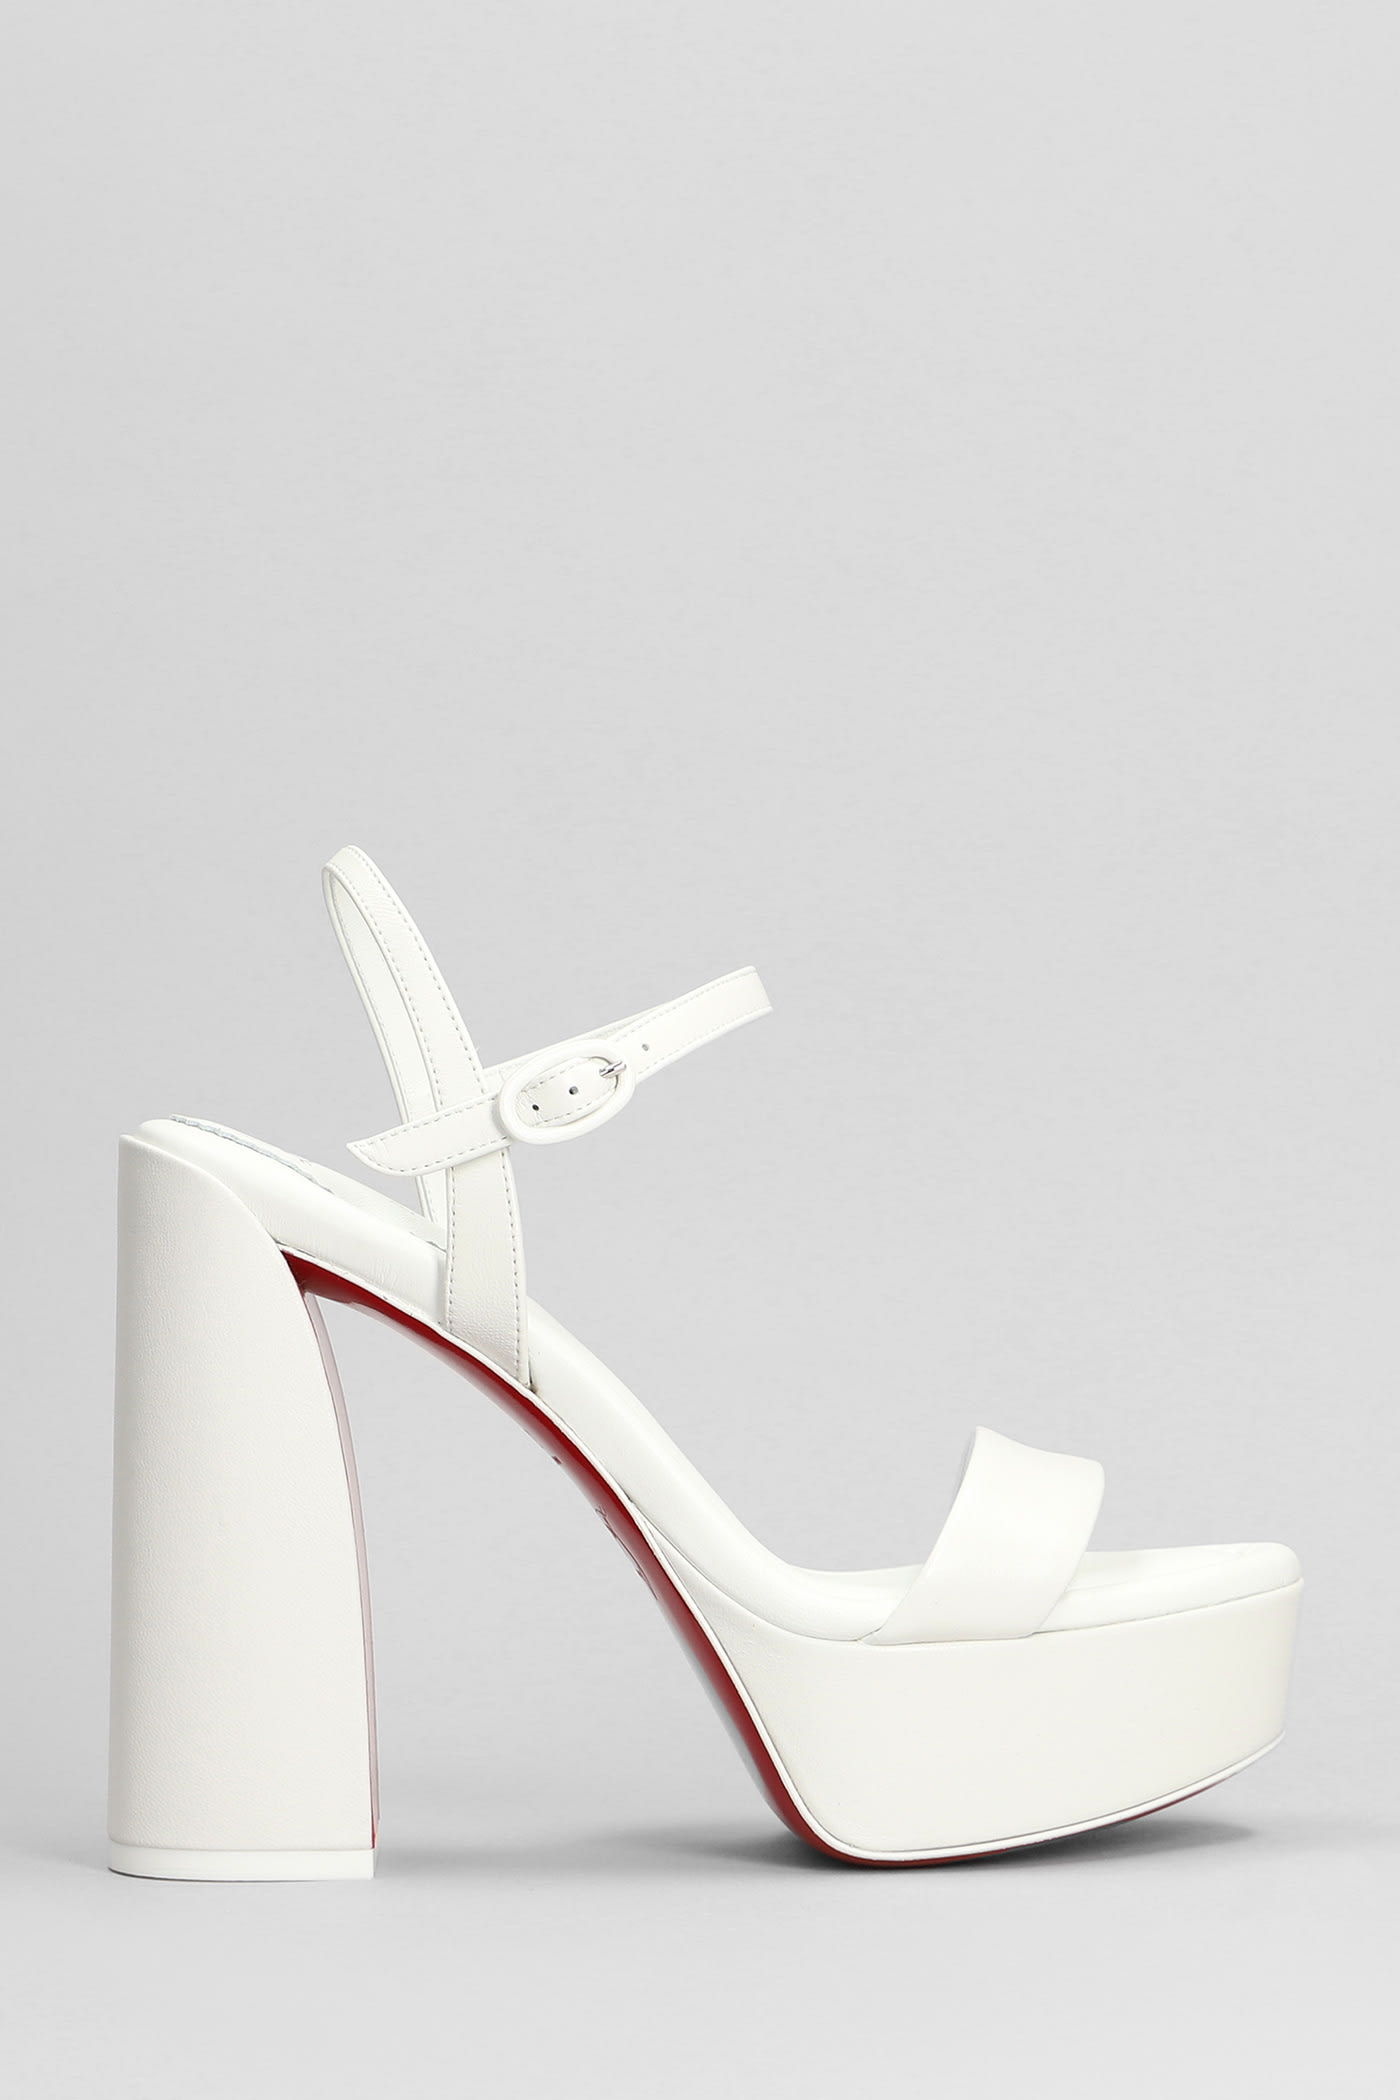 Movida Jane Sandals In White Leather